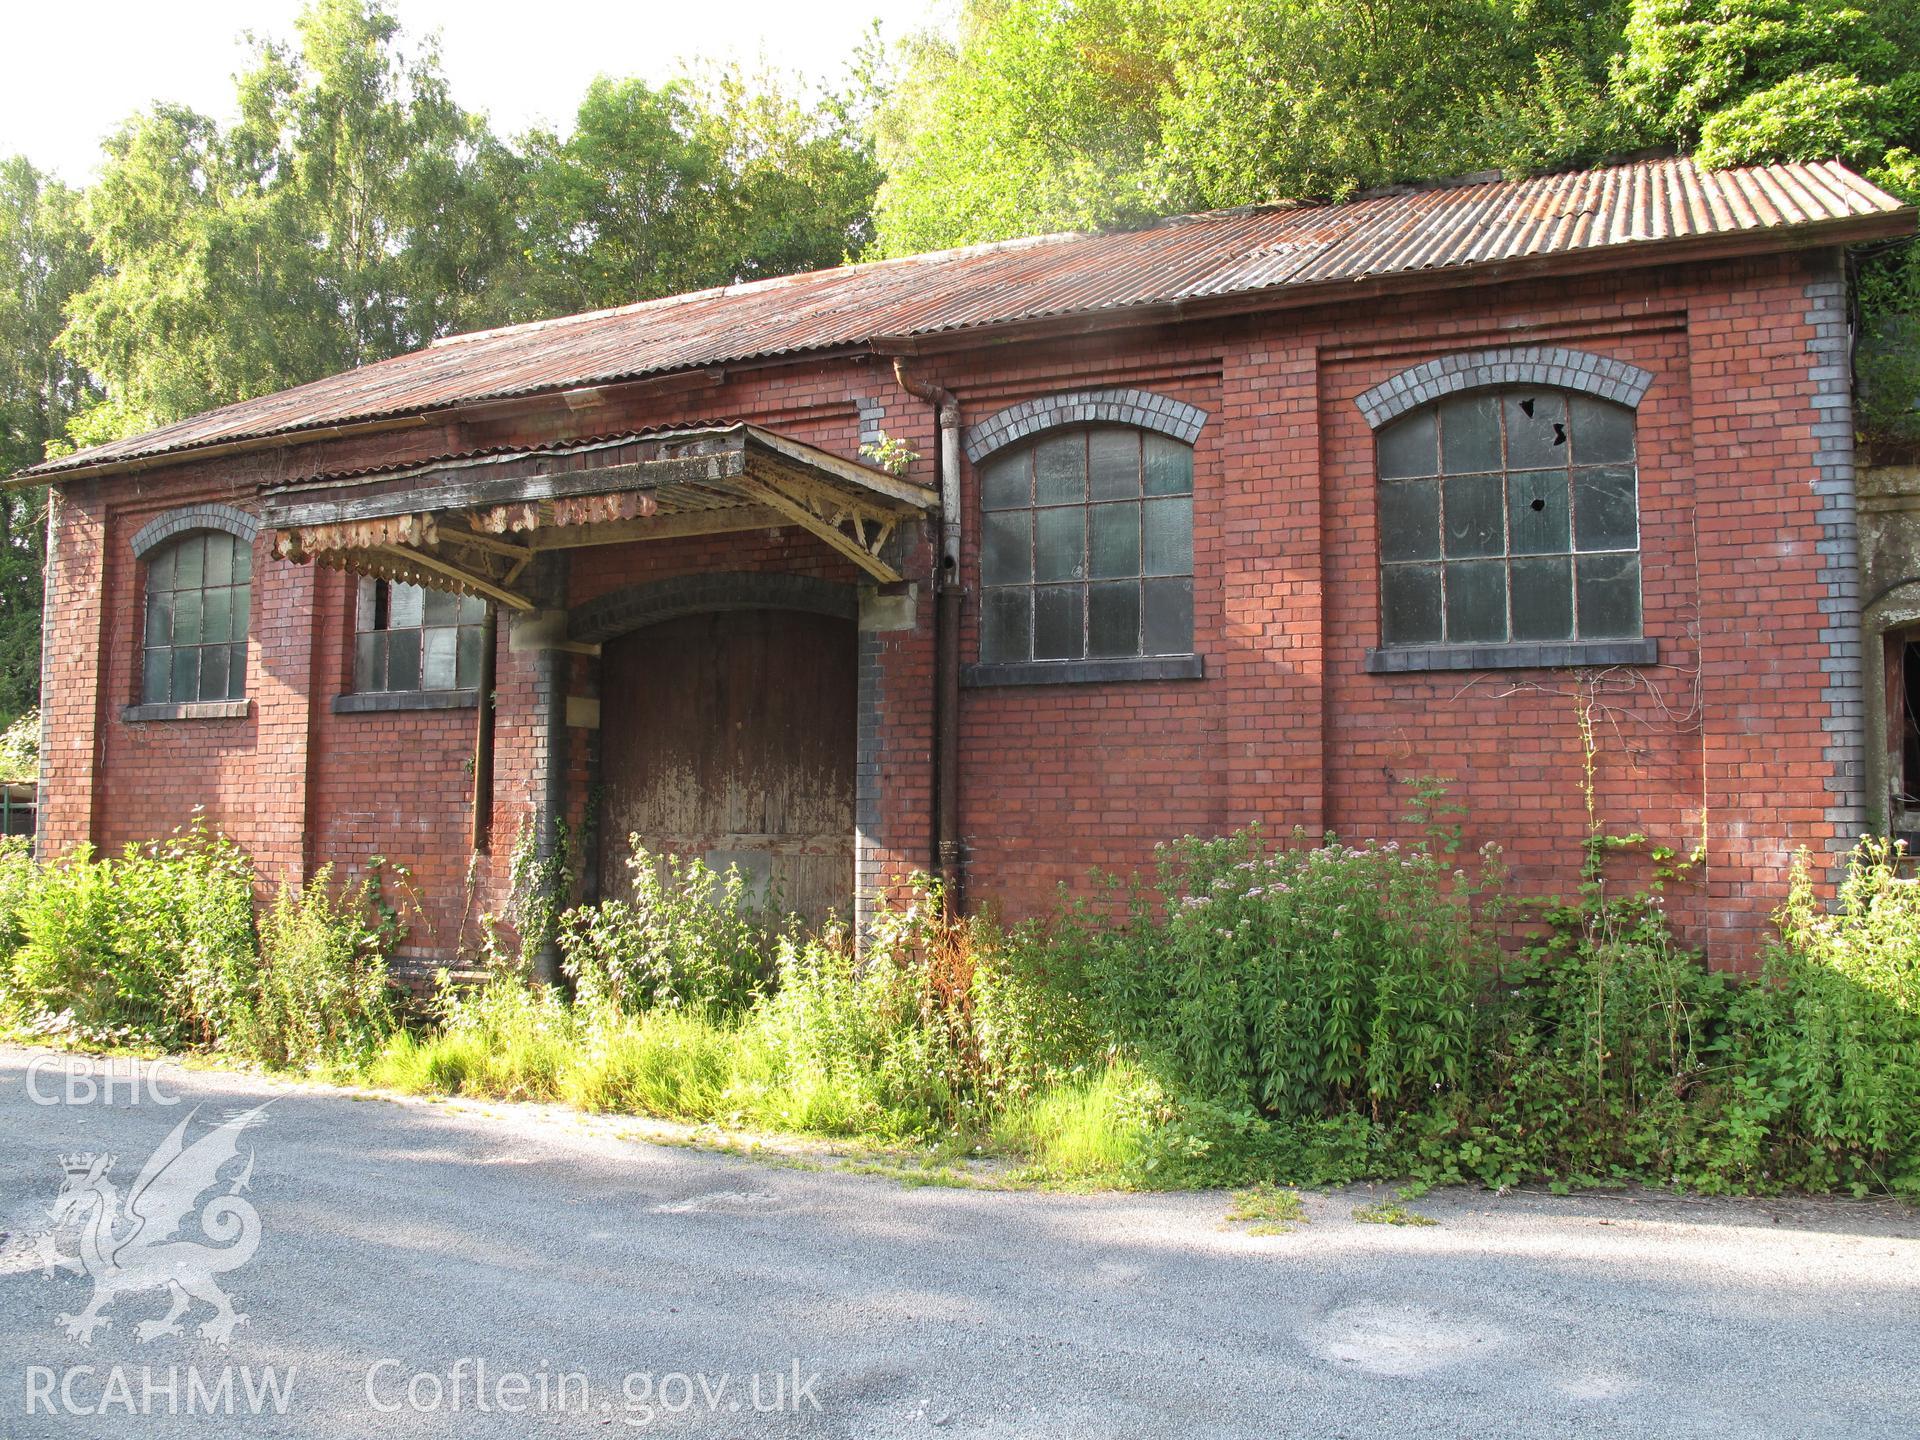 South elevation of Usk Railway Goods Shed.